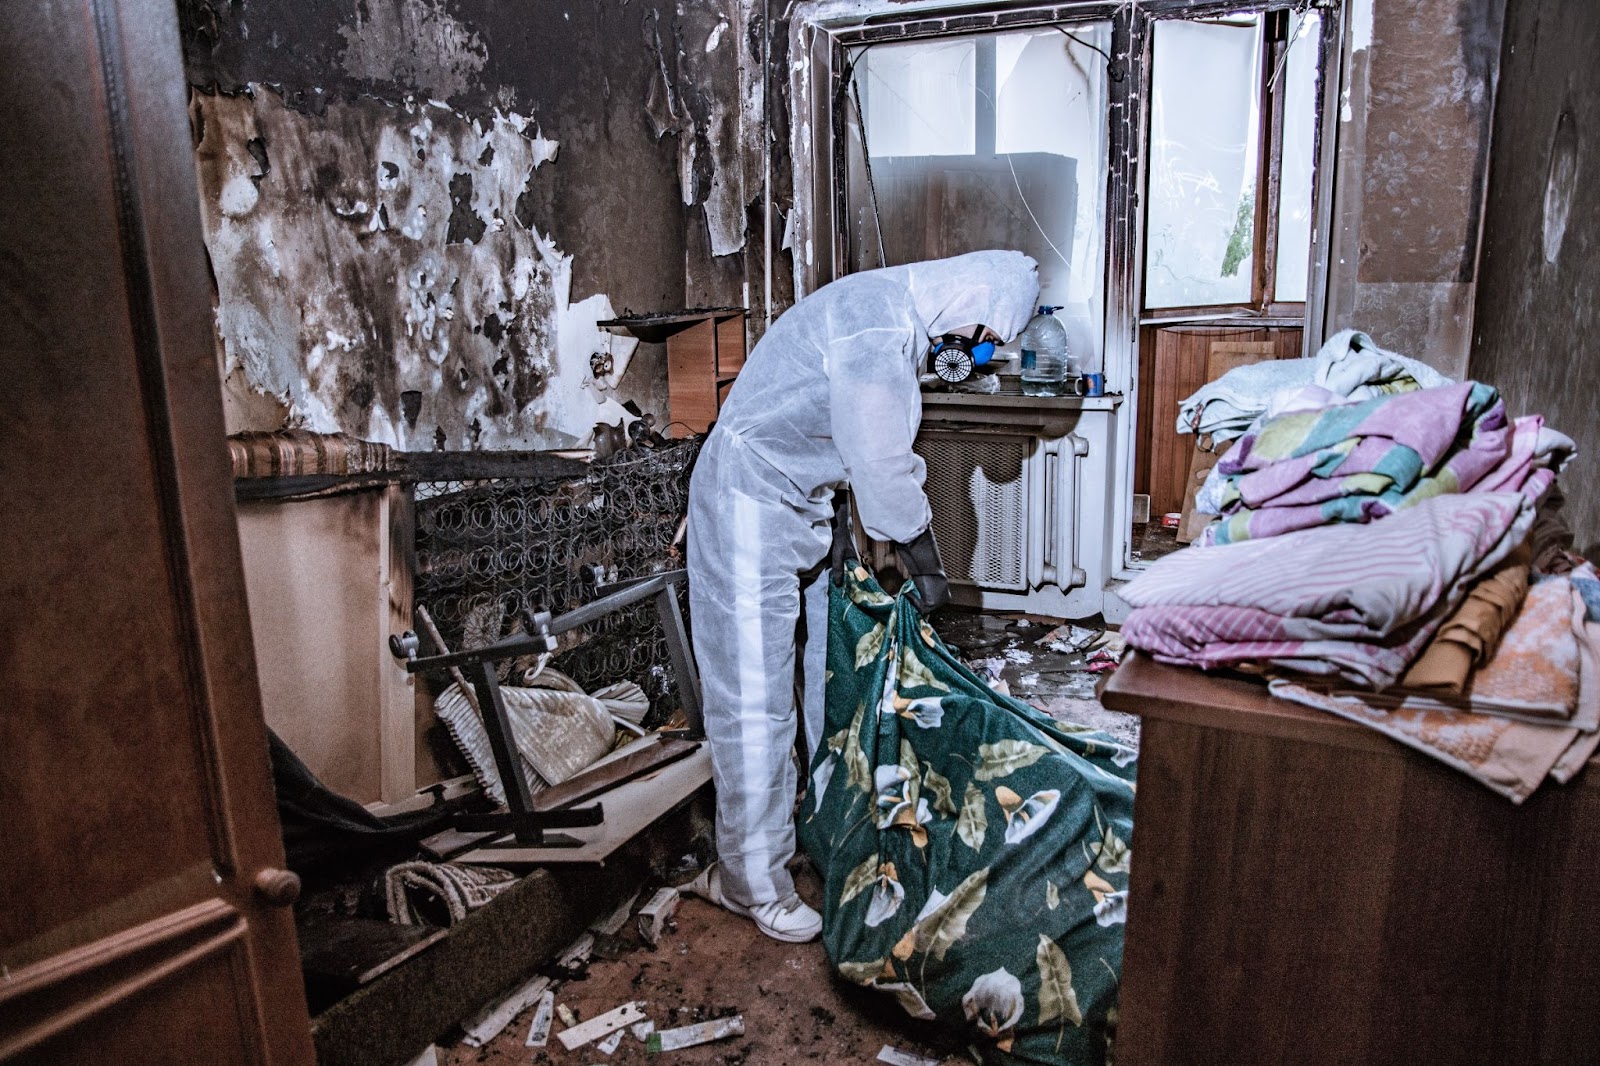 A person in a white protective suit stands in a room with a bed and other items, after a house fire for fire restoration